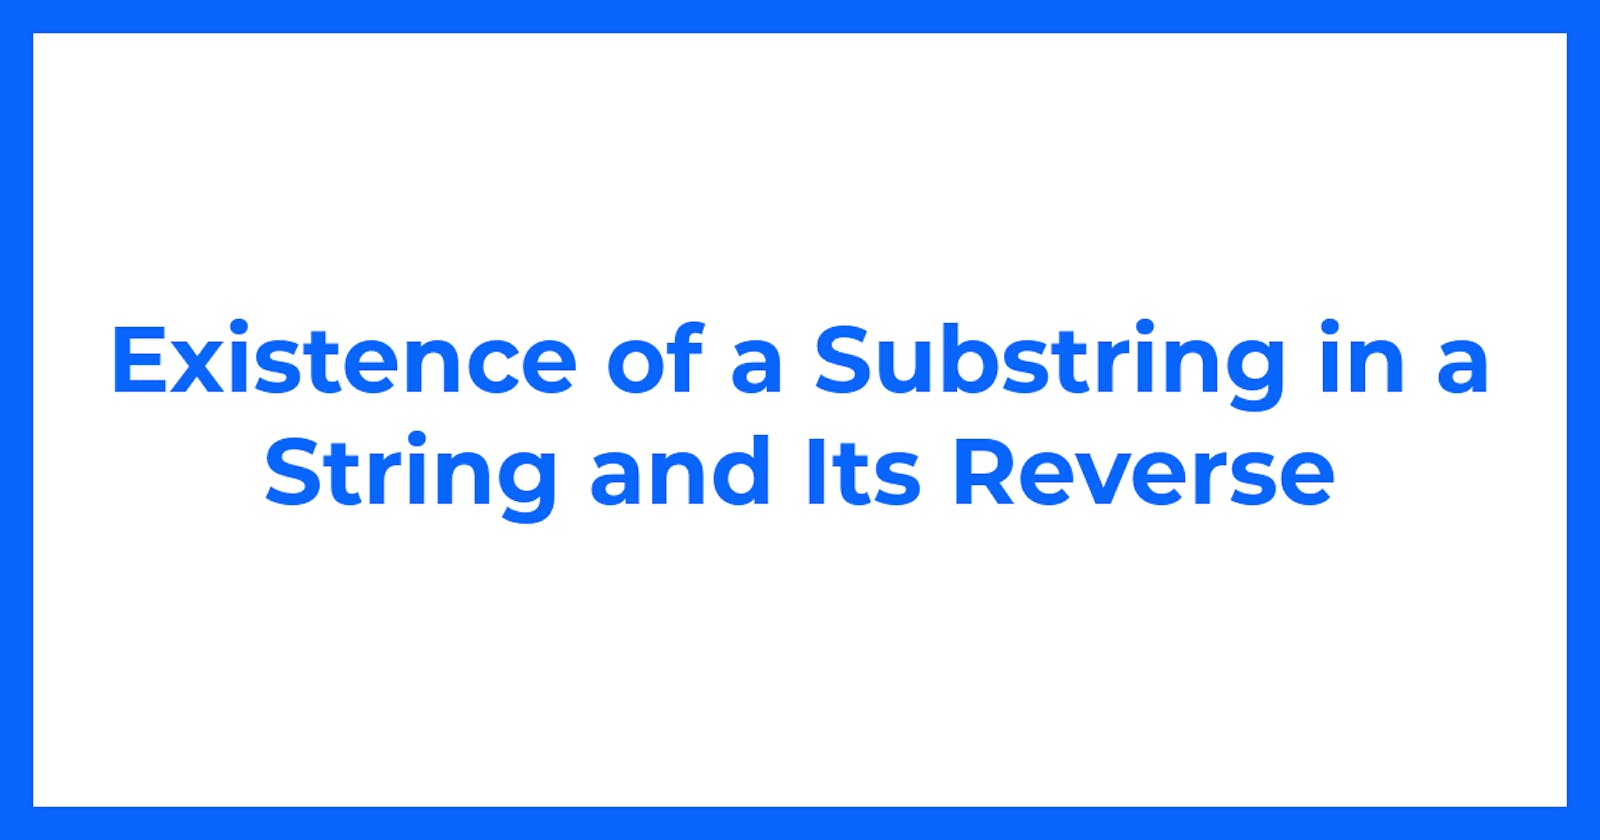 Existence of a Substring in a String and Its Reverse